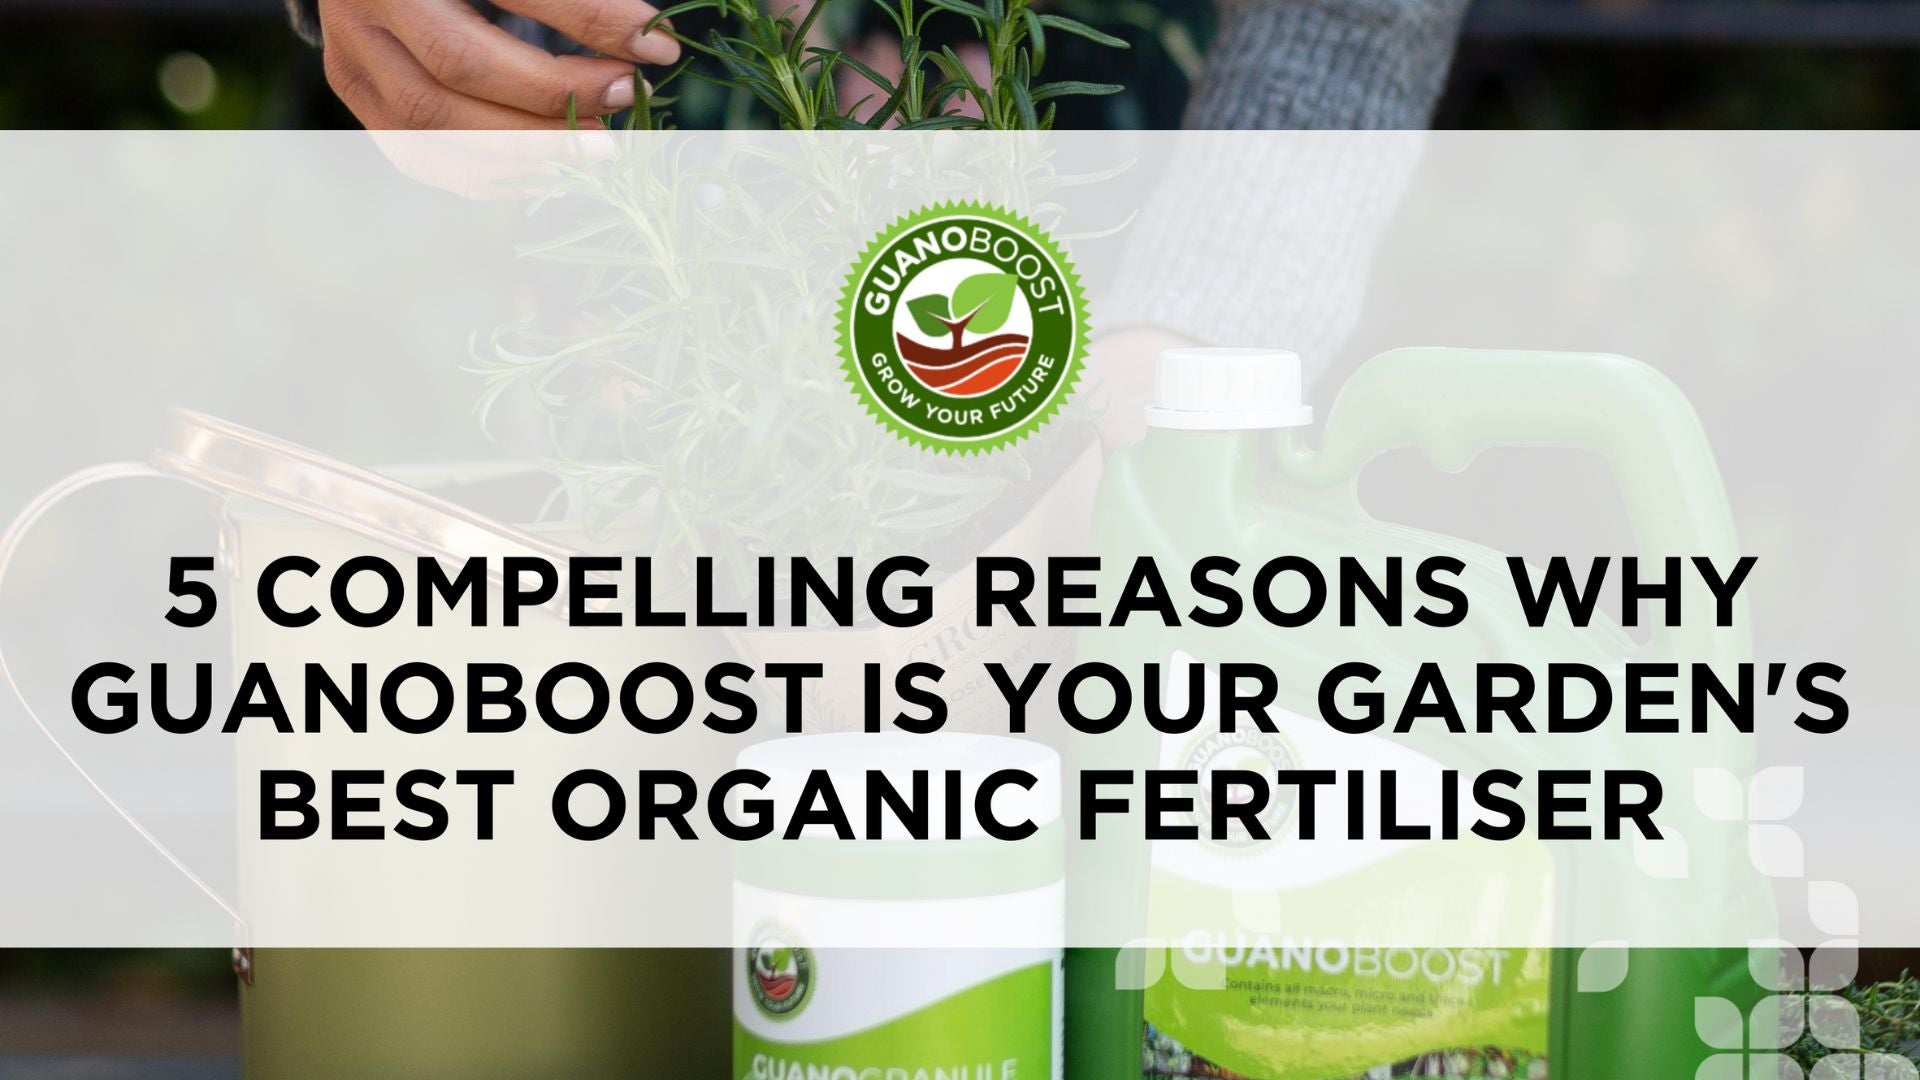 5 Compelling Reasons Why GuanoBoost is Your Garden's Best Organic Fertiliser